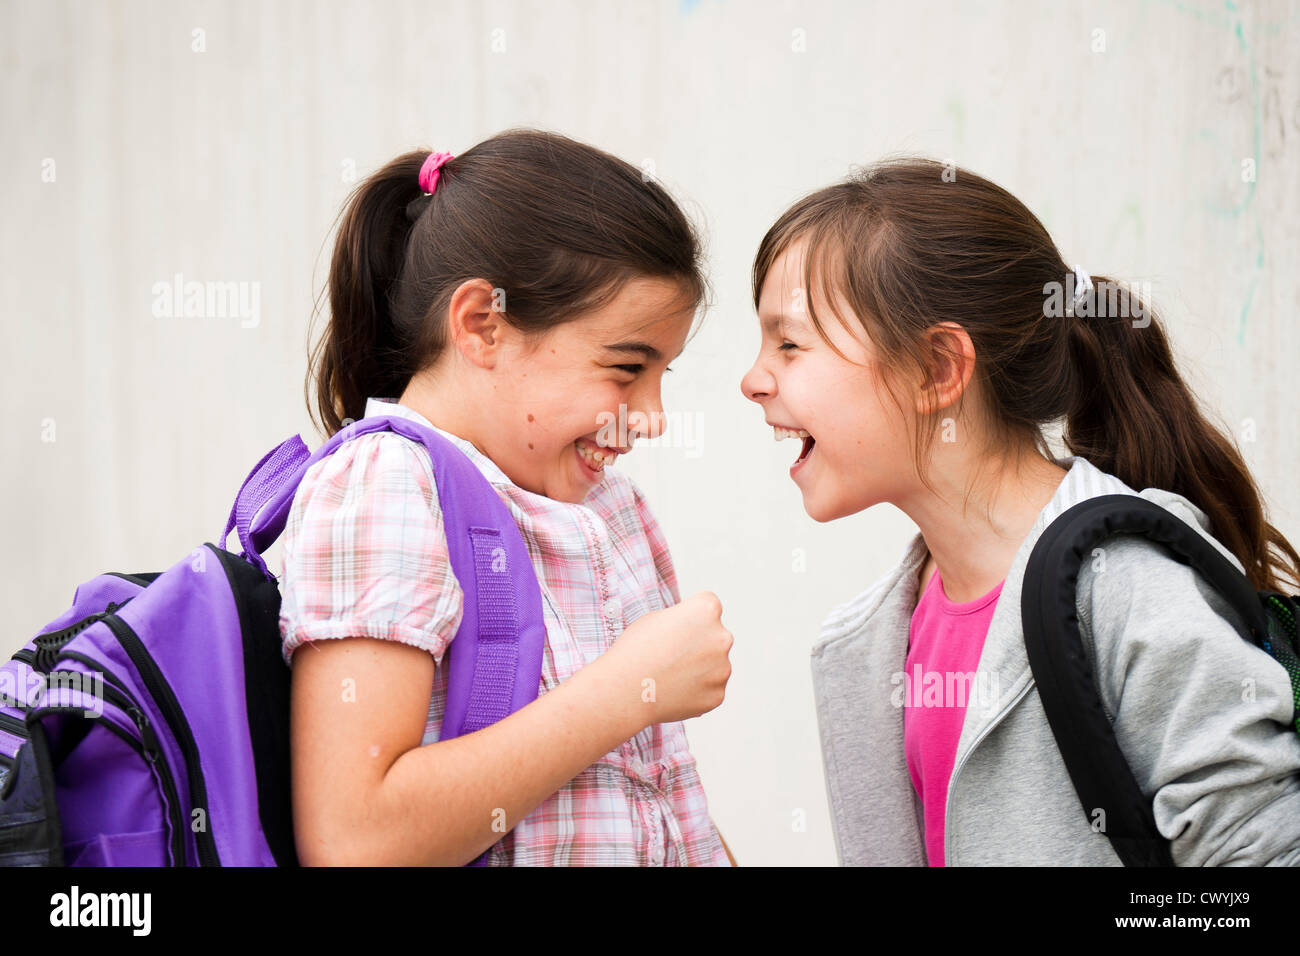 Two laughing girls looking at each other Stock Photo